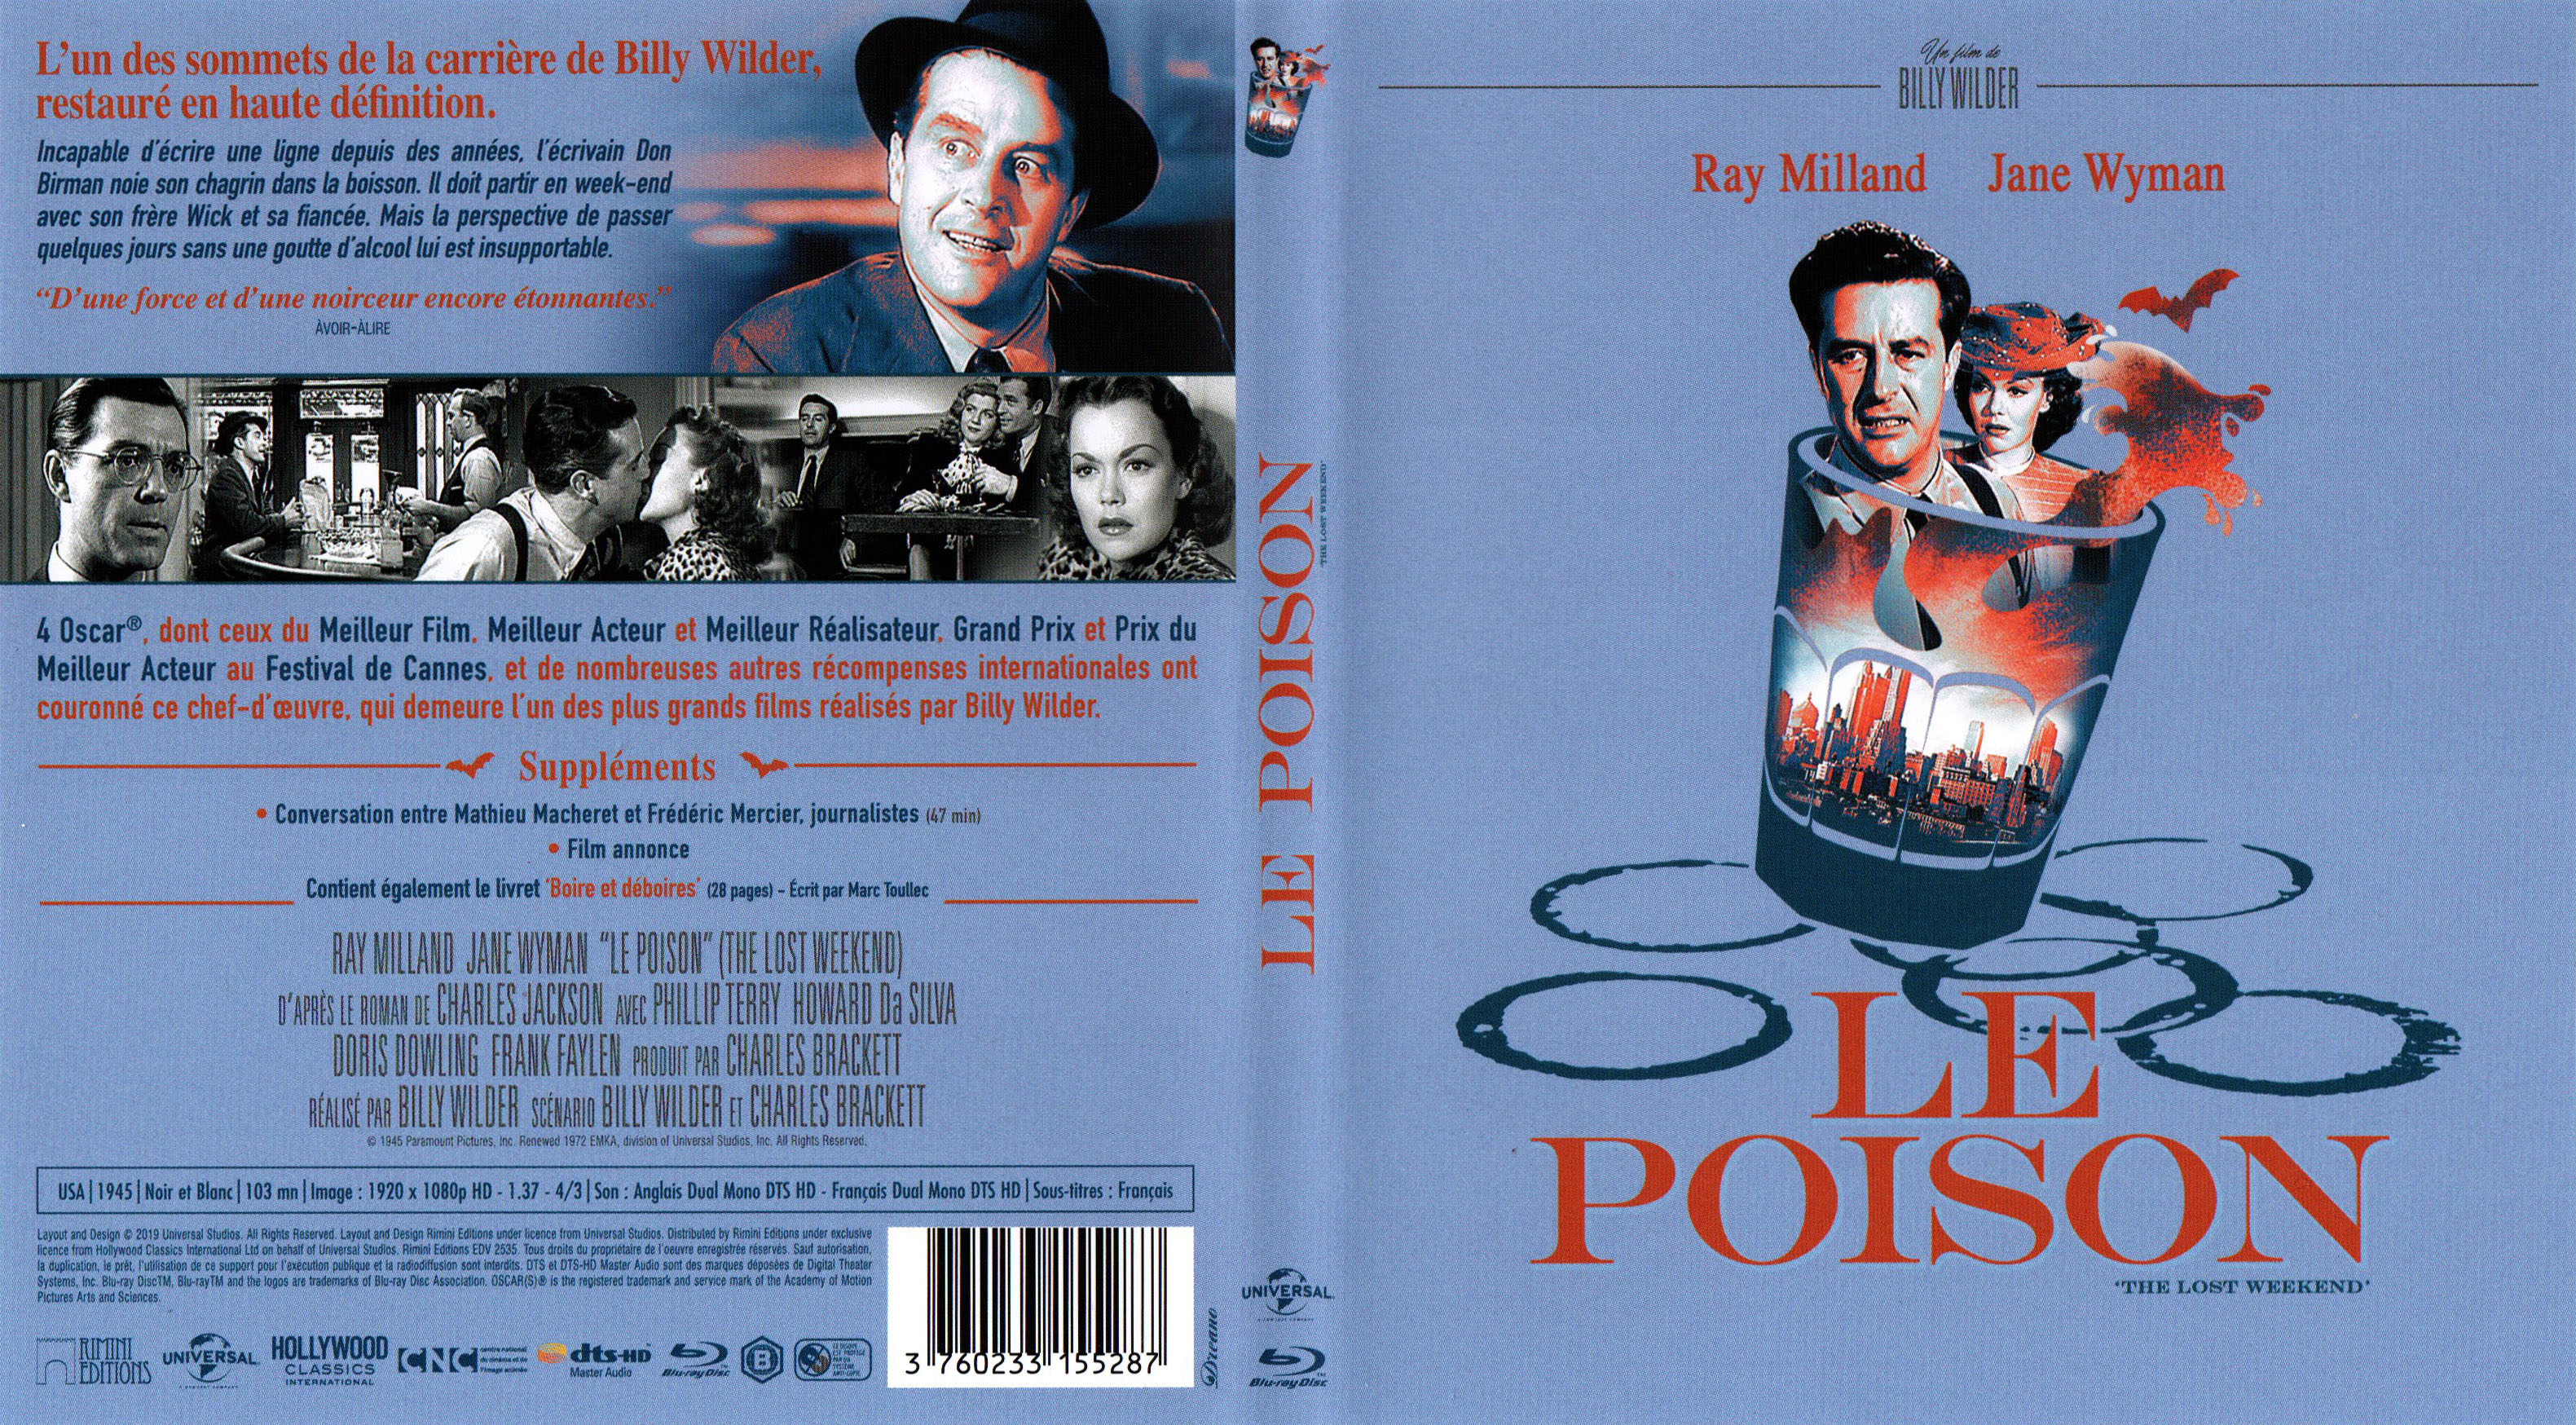 Jaquette DVD Le poison (BLU-RAY)